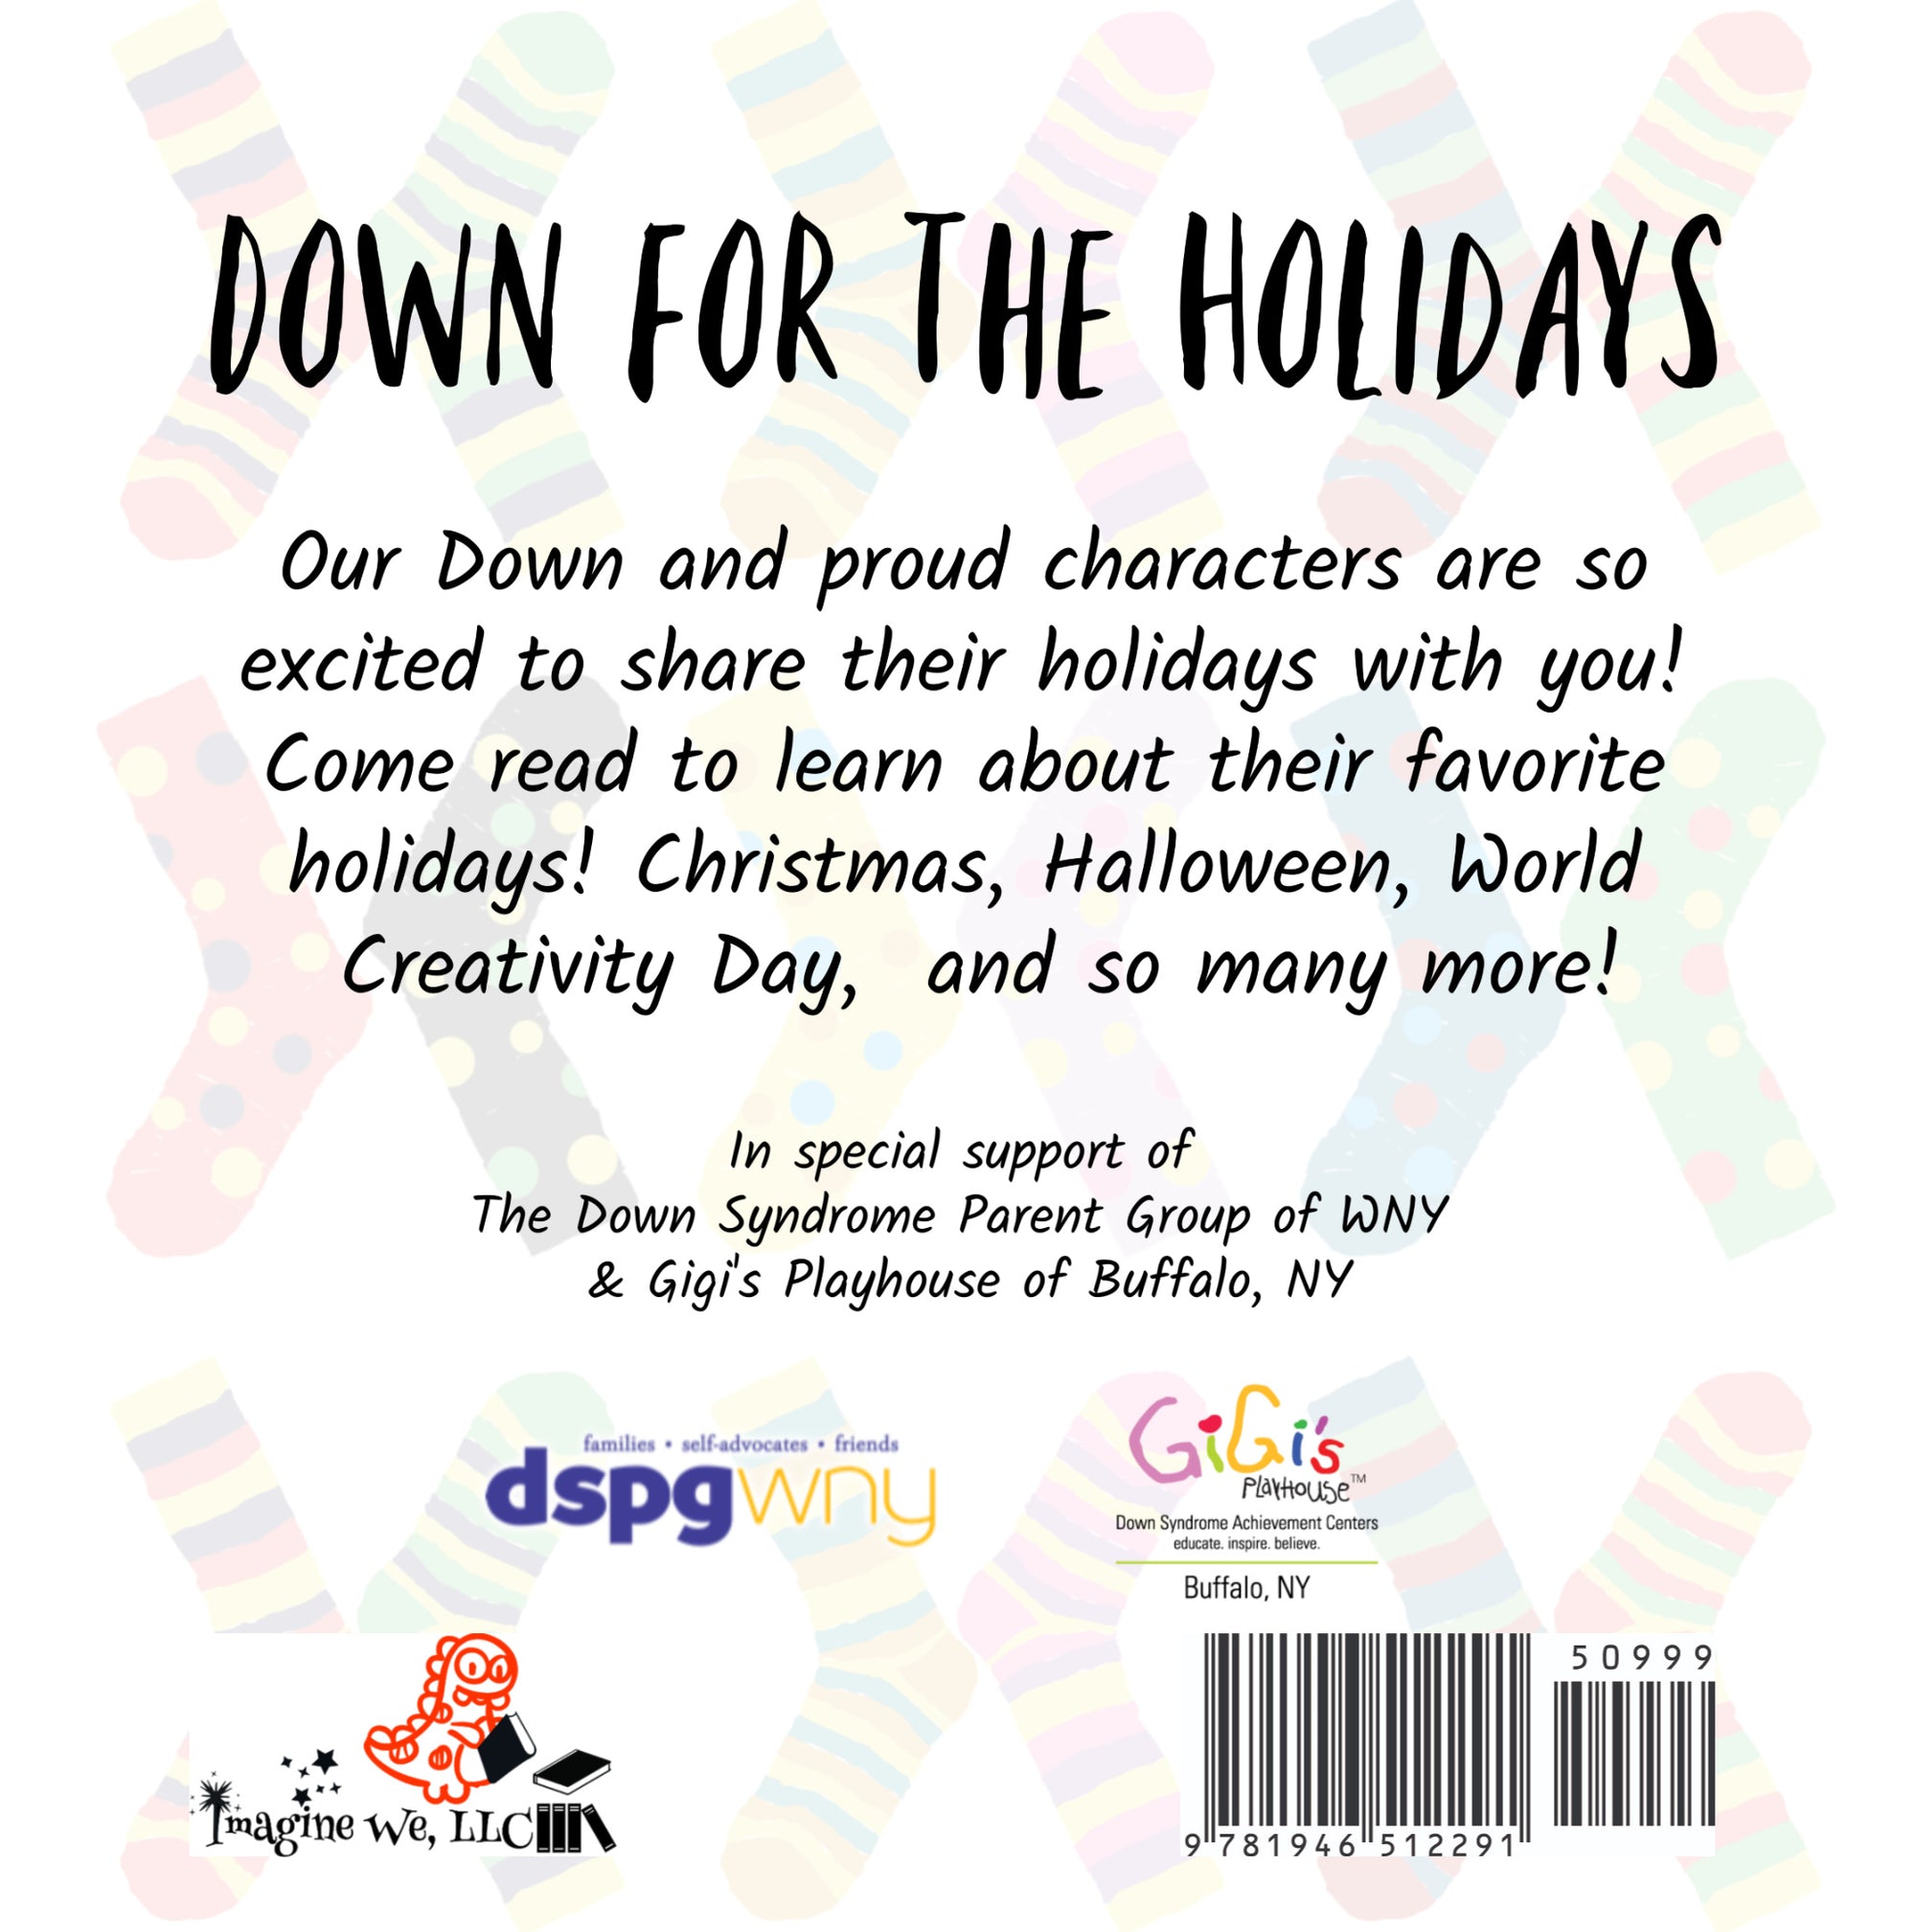 Down for the Holidays - ImagineWe Publishers